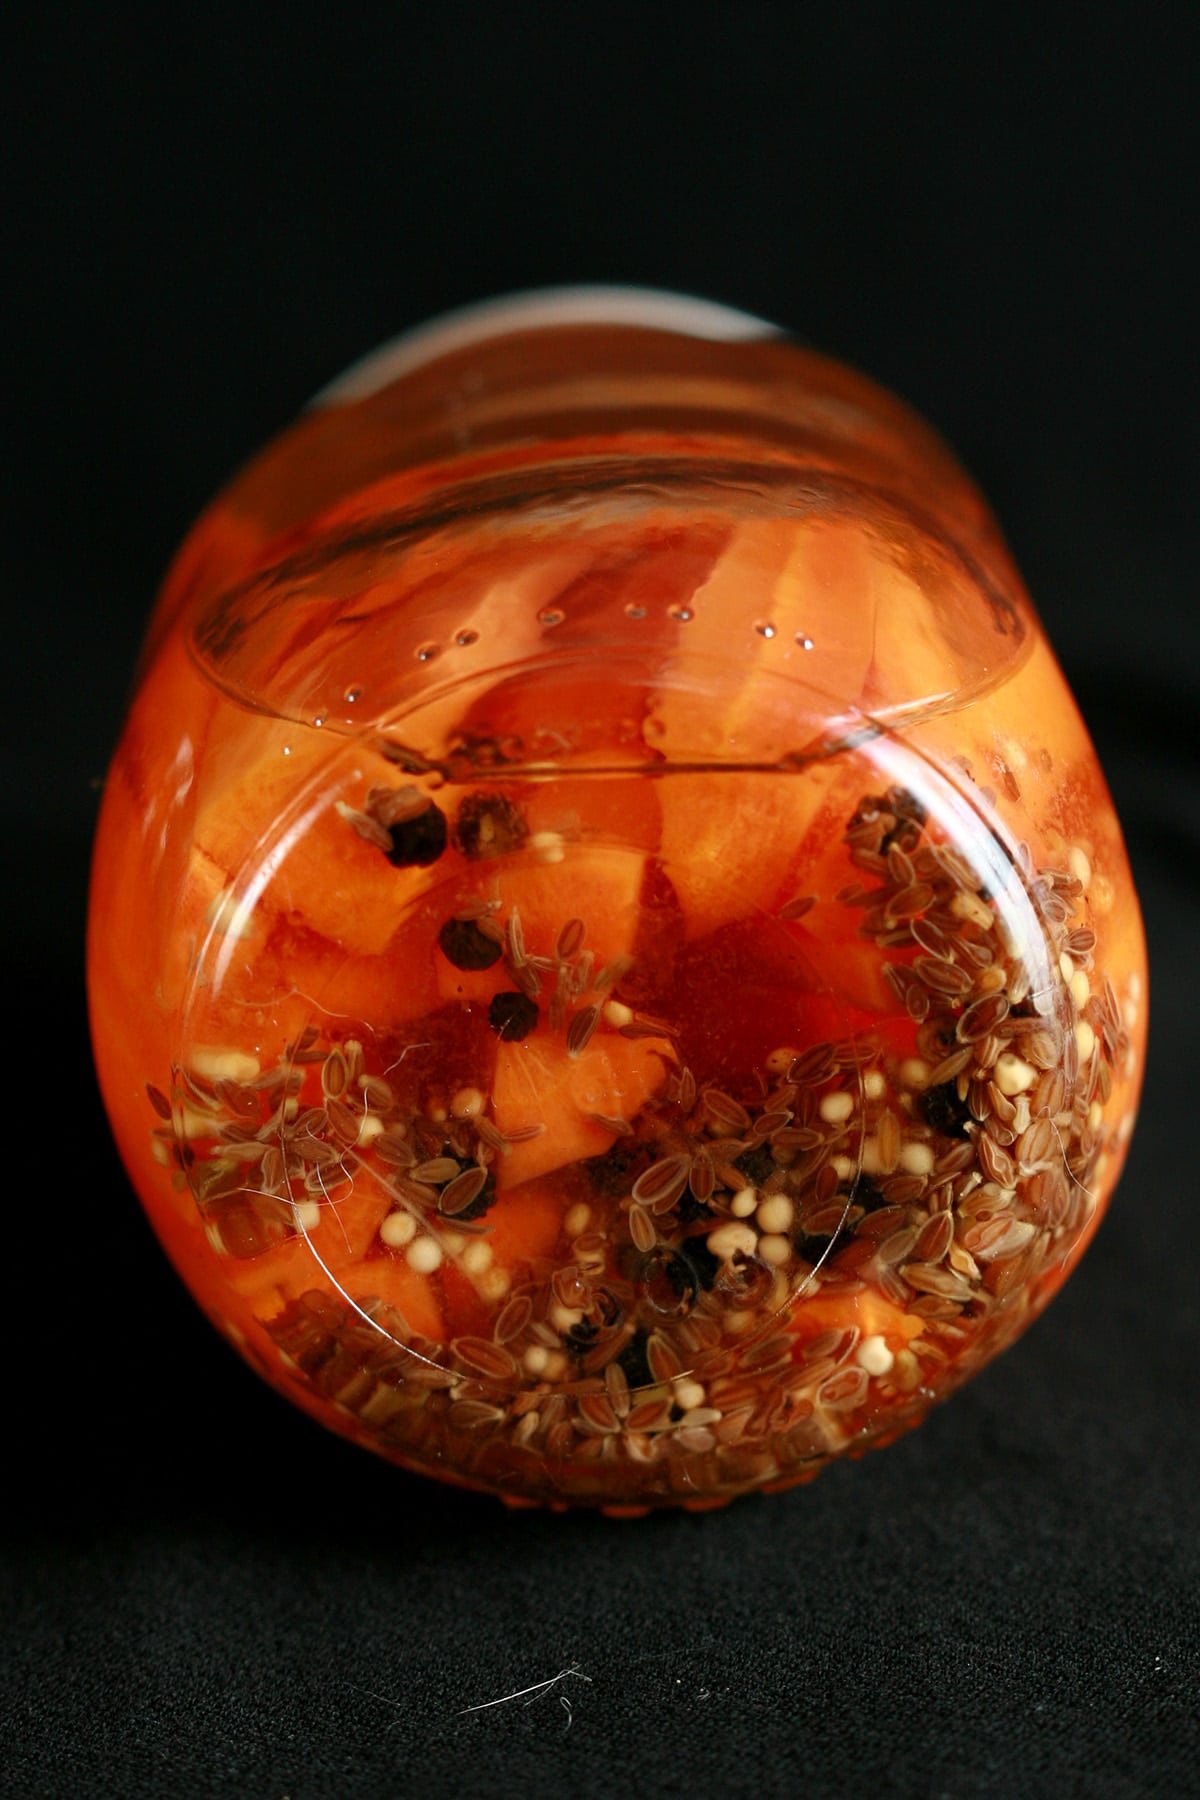 A jar of dill pickled carrots, on its side.